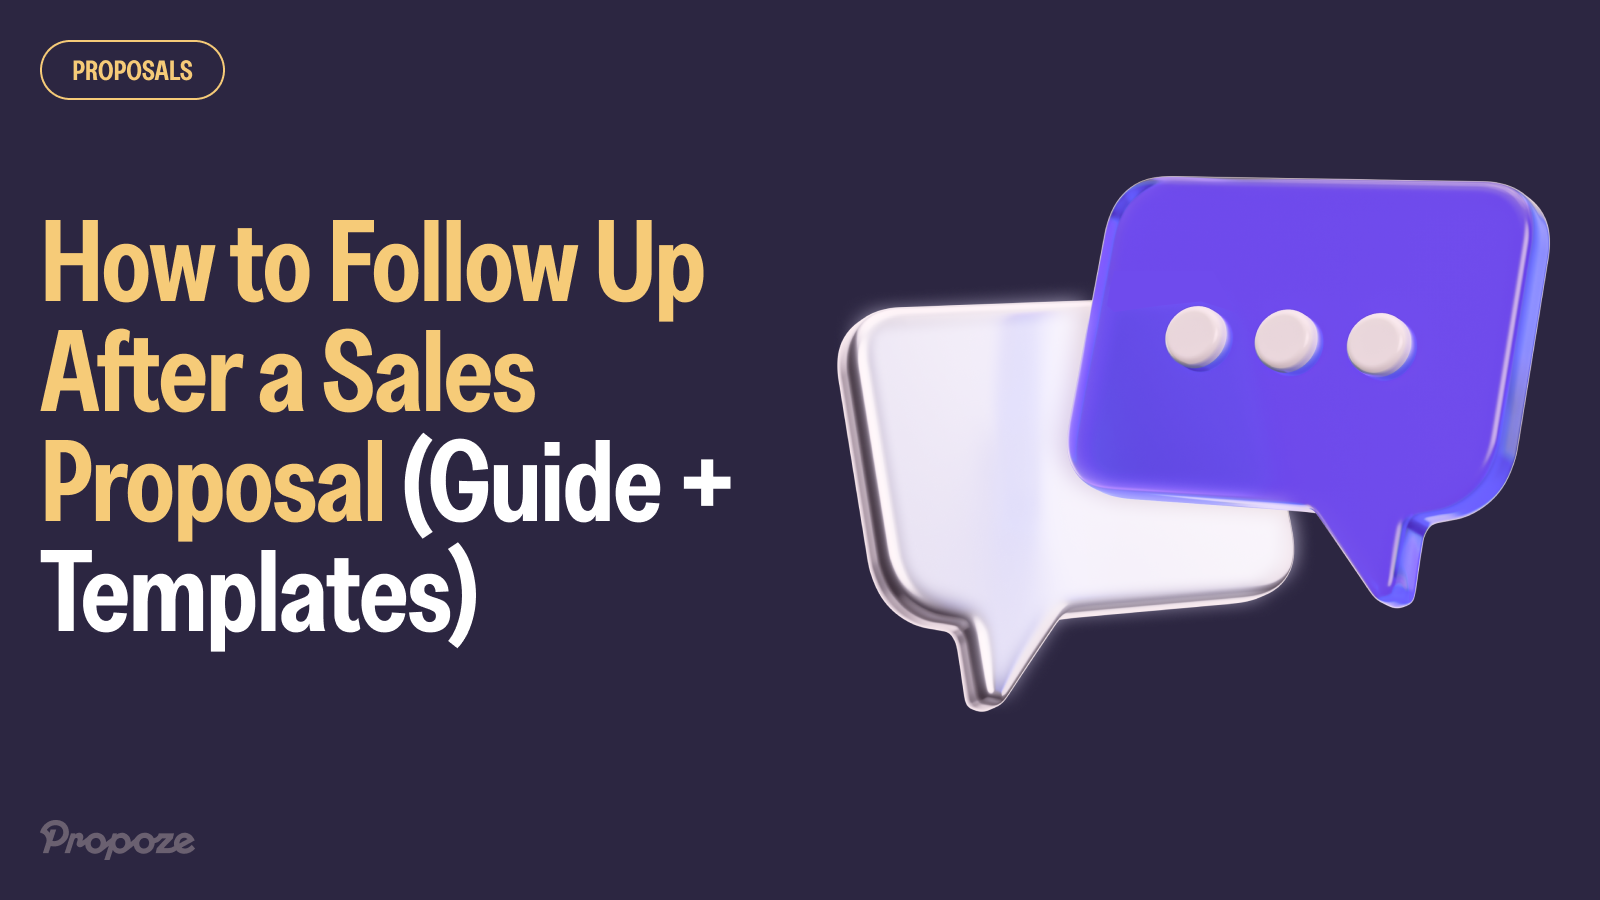 How to Follow Up After a Sales Proposal (Guide + Templates)